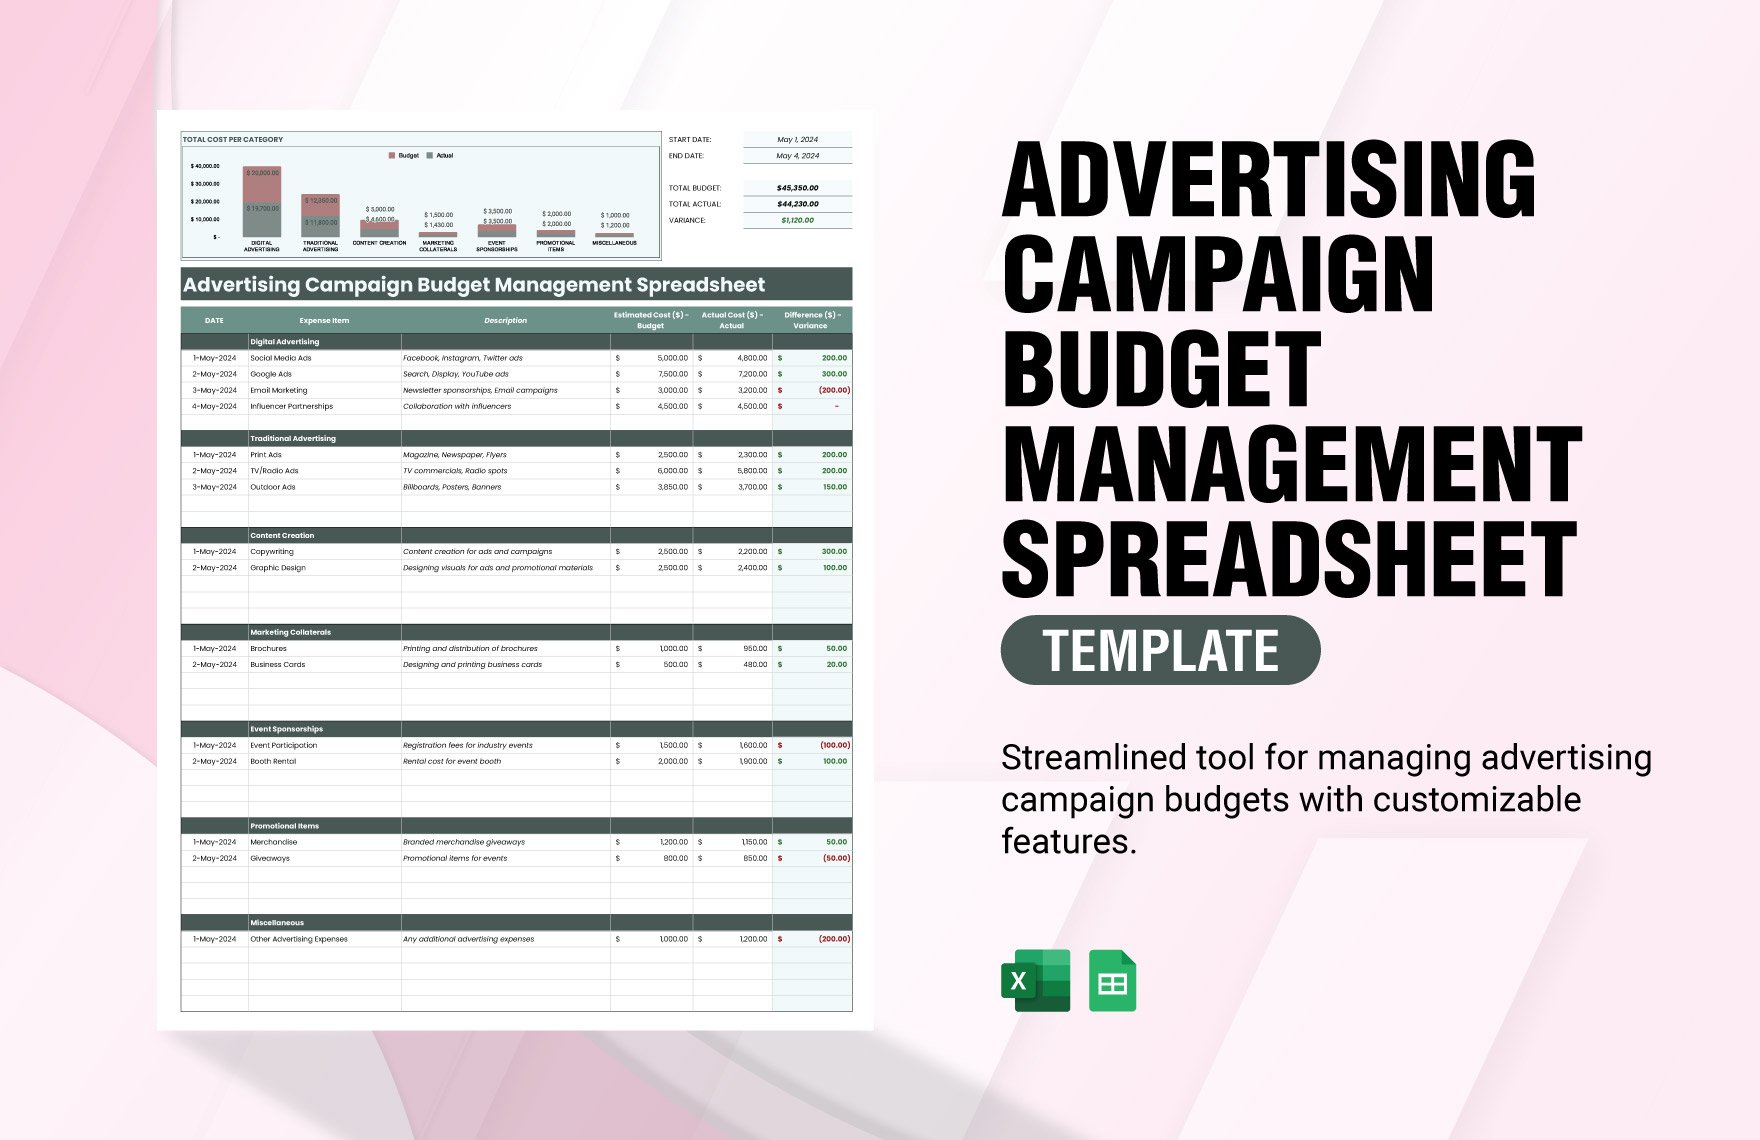 Advertising Campaign Budget Management Spreadsheet Template in Excel, Google Sheets